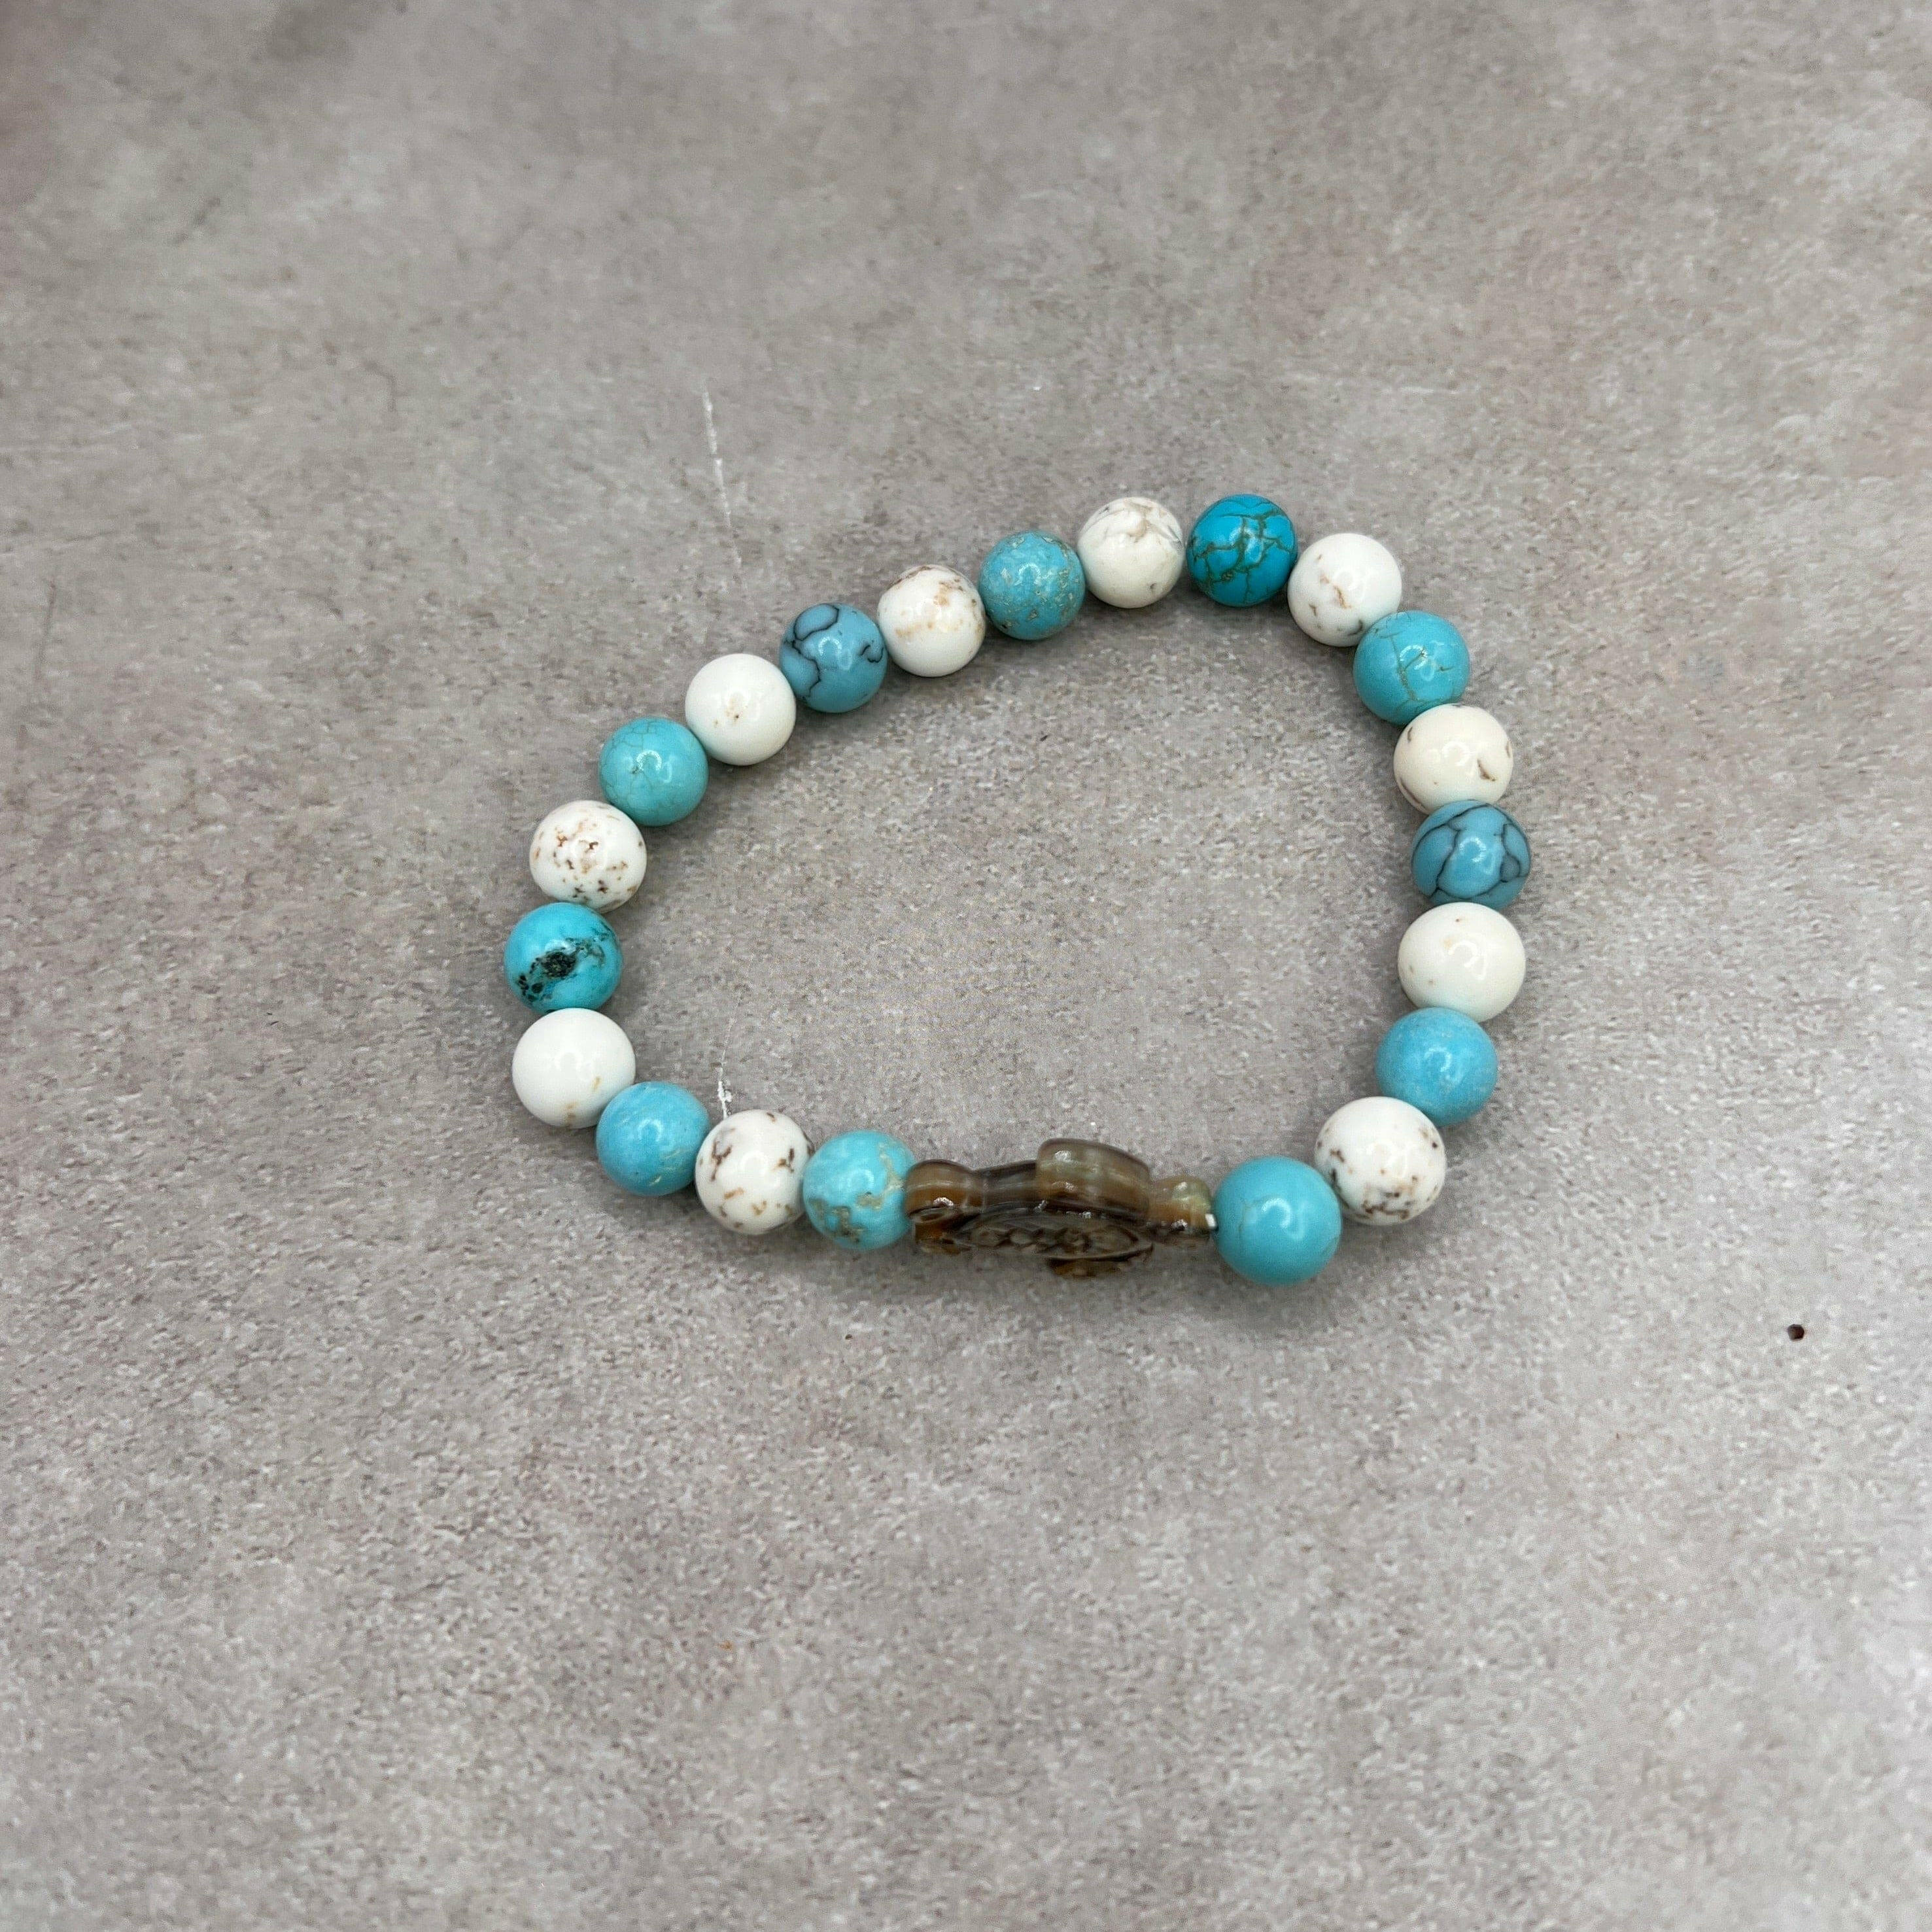 Bec Sue Jewelry Shop turtle bracelets 6.25/7 / blue/white / turquoise blue/white One-of-a-kind Turquoise Blue Turtle Bracelet with 8mm Beads and Pearl Turtle Charm Tags 619